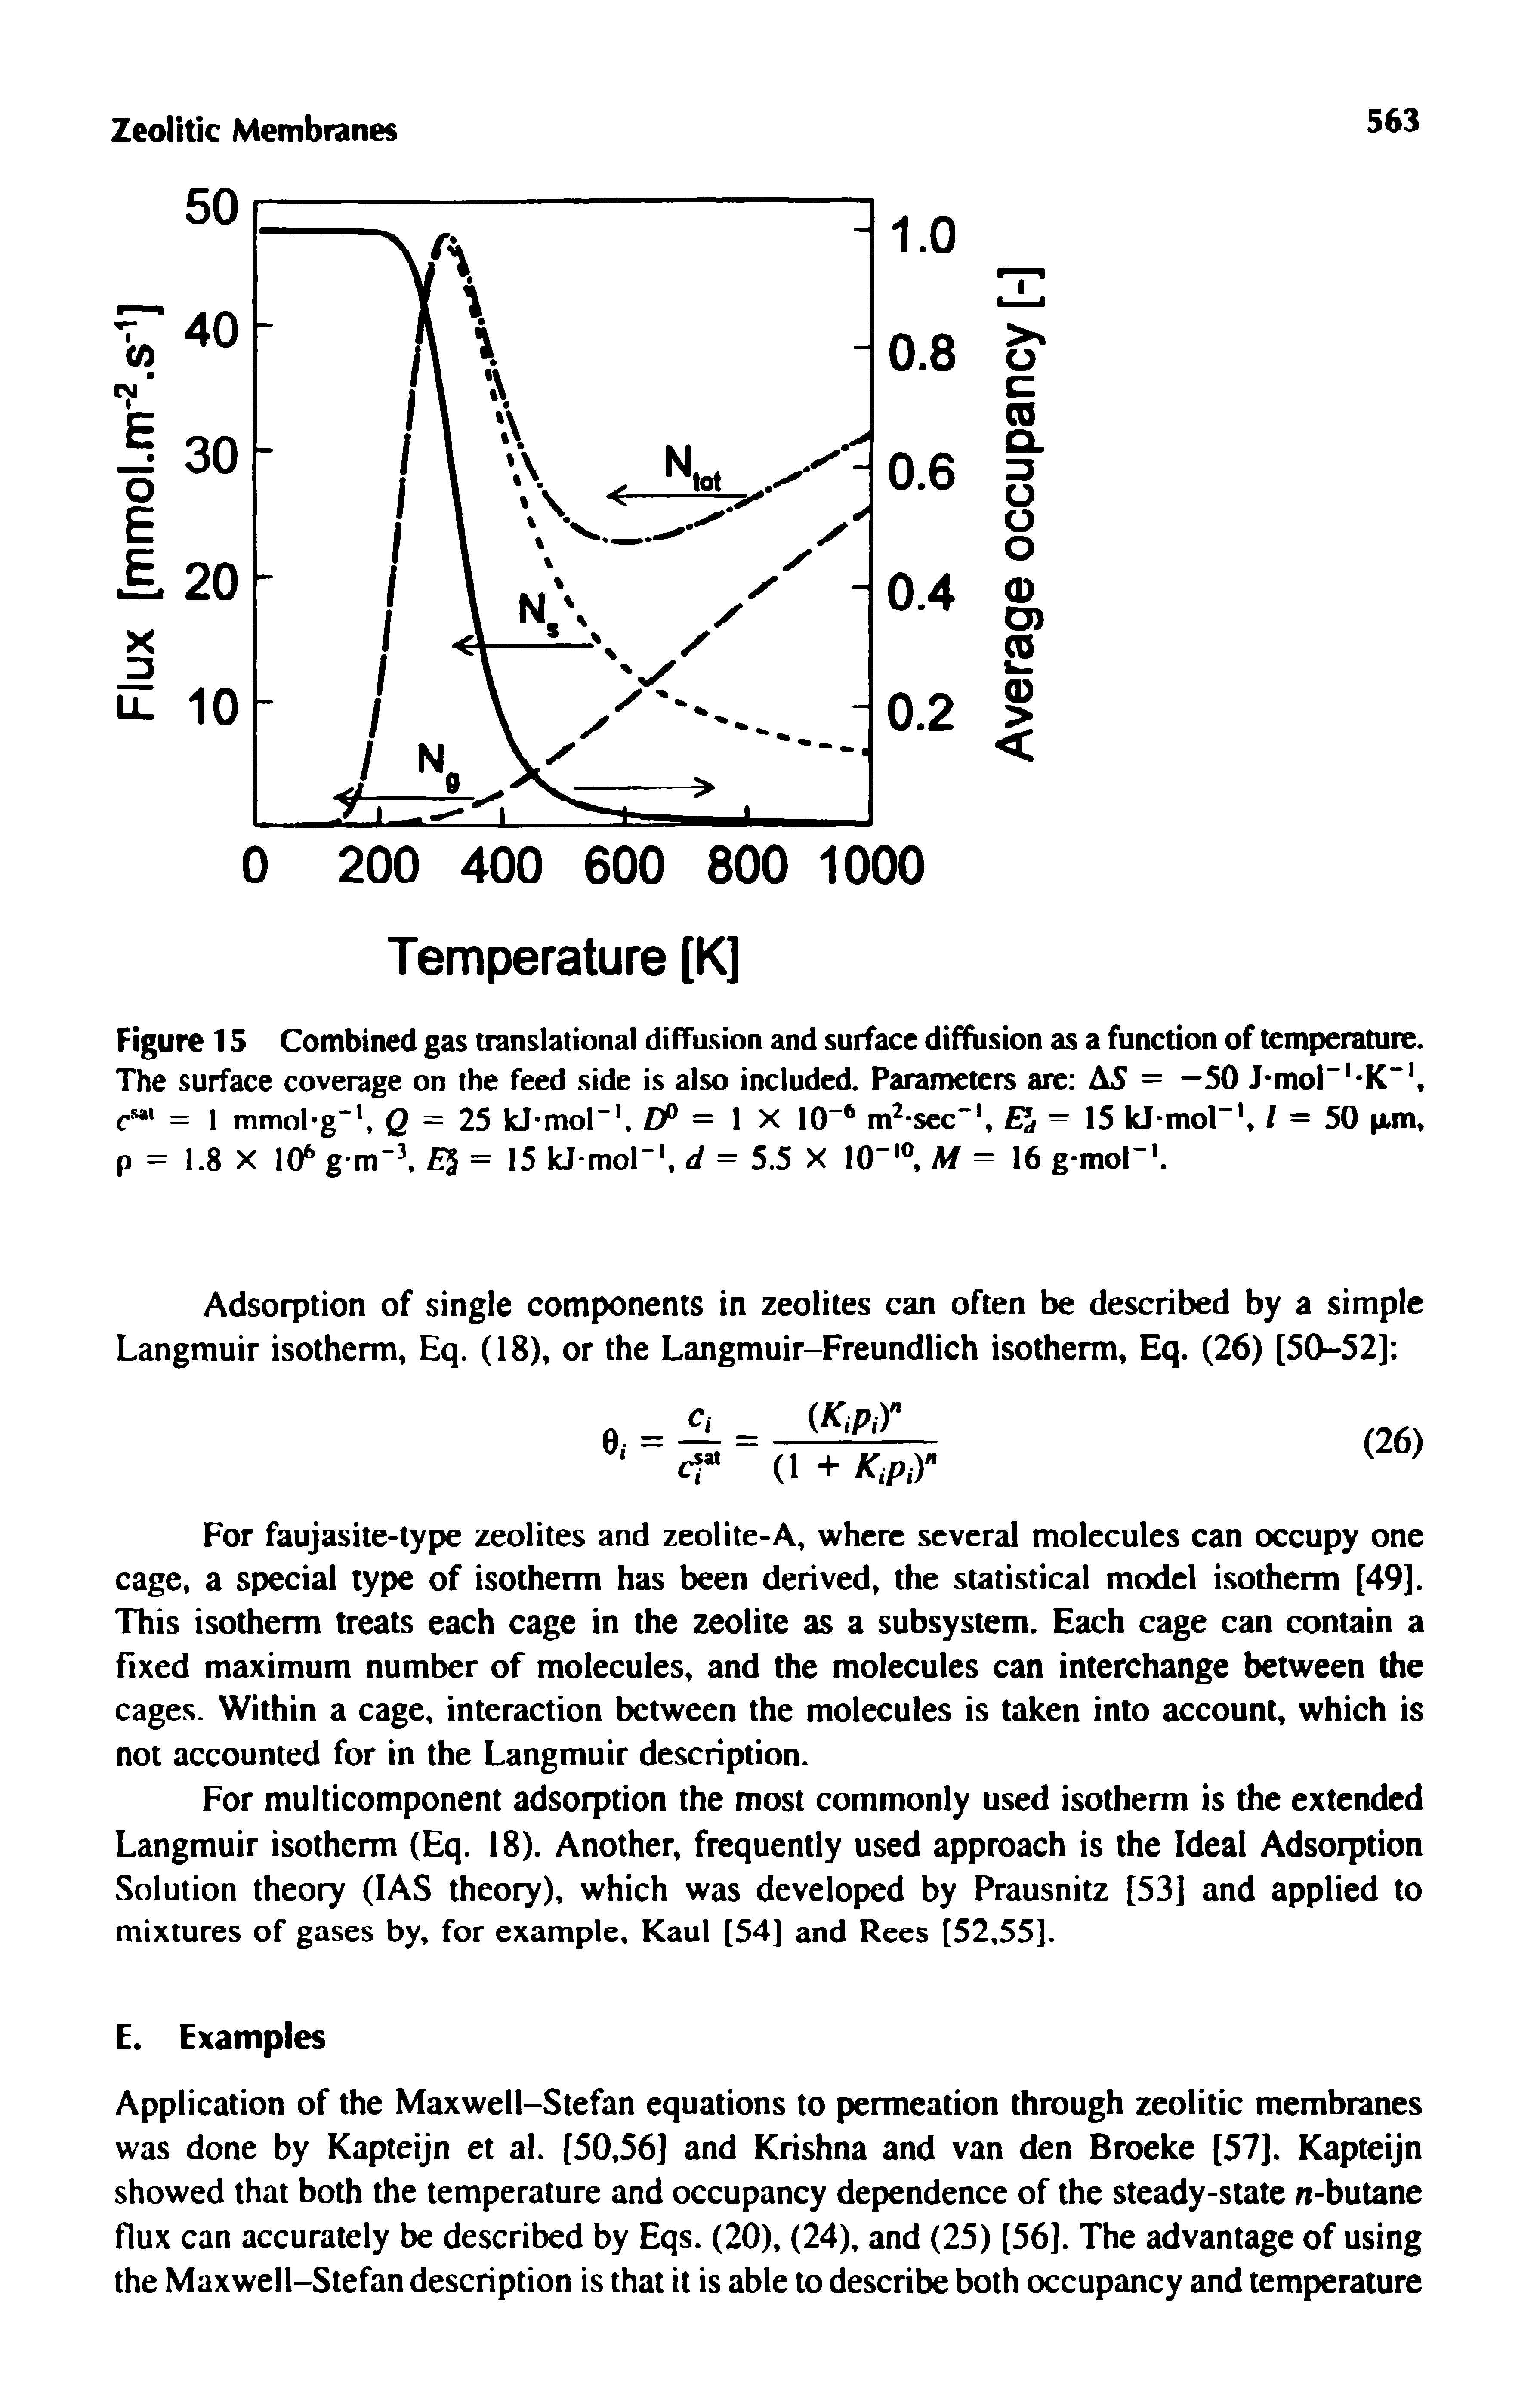 Figure 15 Combined gas translational diffusion and surface diffusion as a function of temperature. The surface coverage on the feed side is also included. Parameters are A5 = —50 J mol K , = 1 mmol g Q = 25 kJ-mol". Efi — X 10" m -sec" = 15 kJ mol" / = 50 pim ...